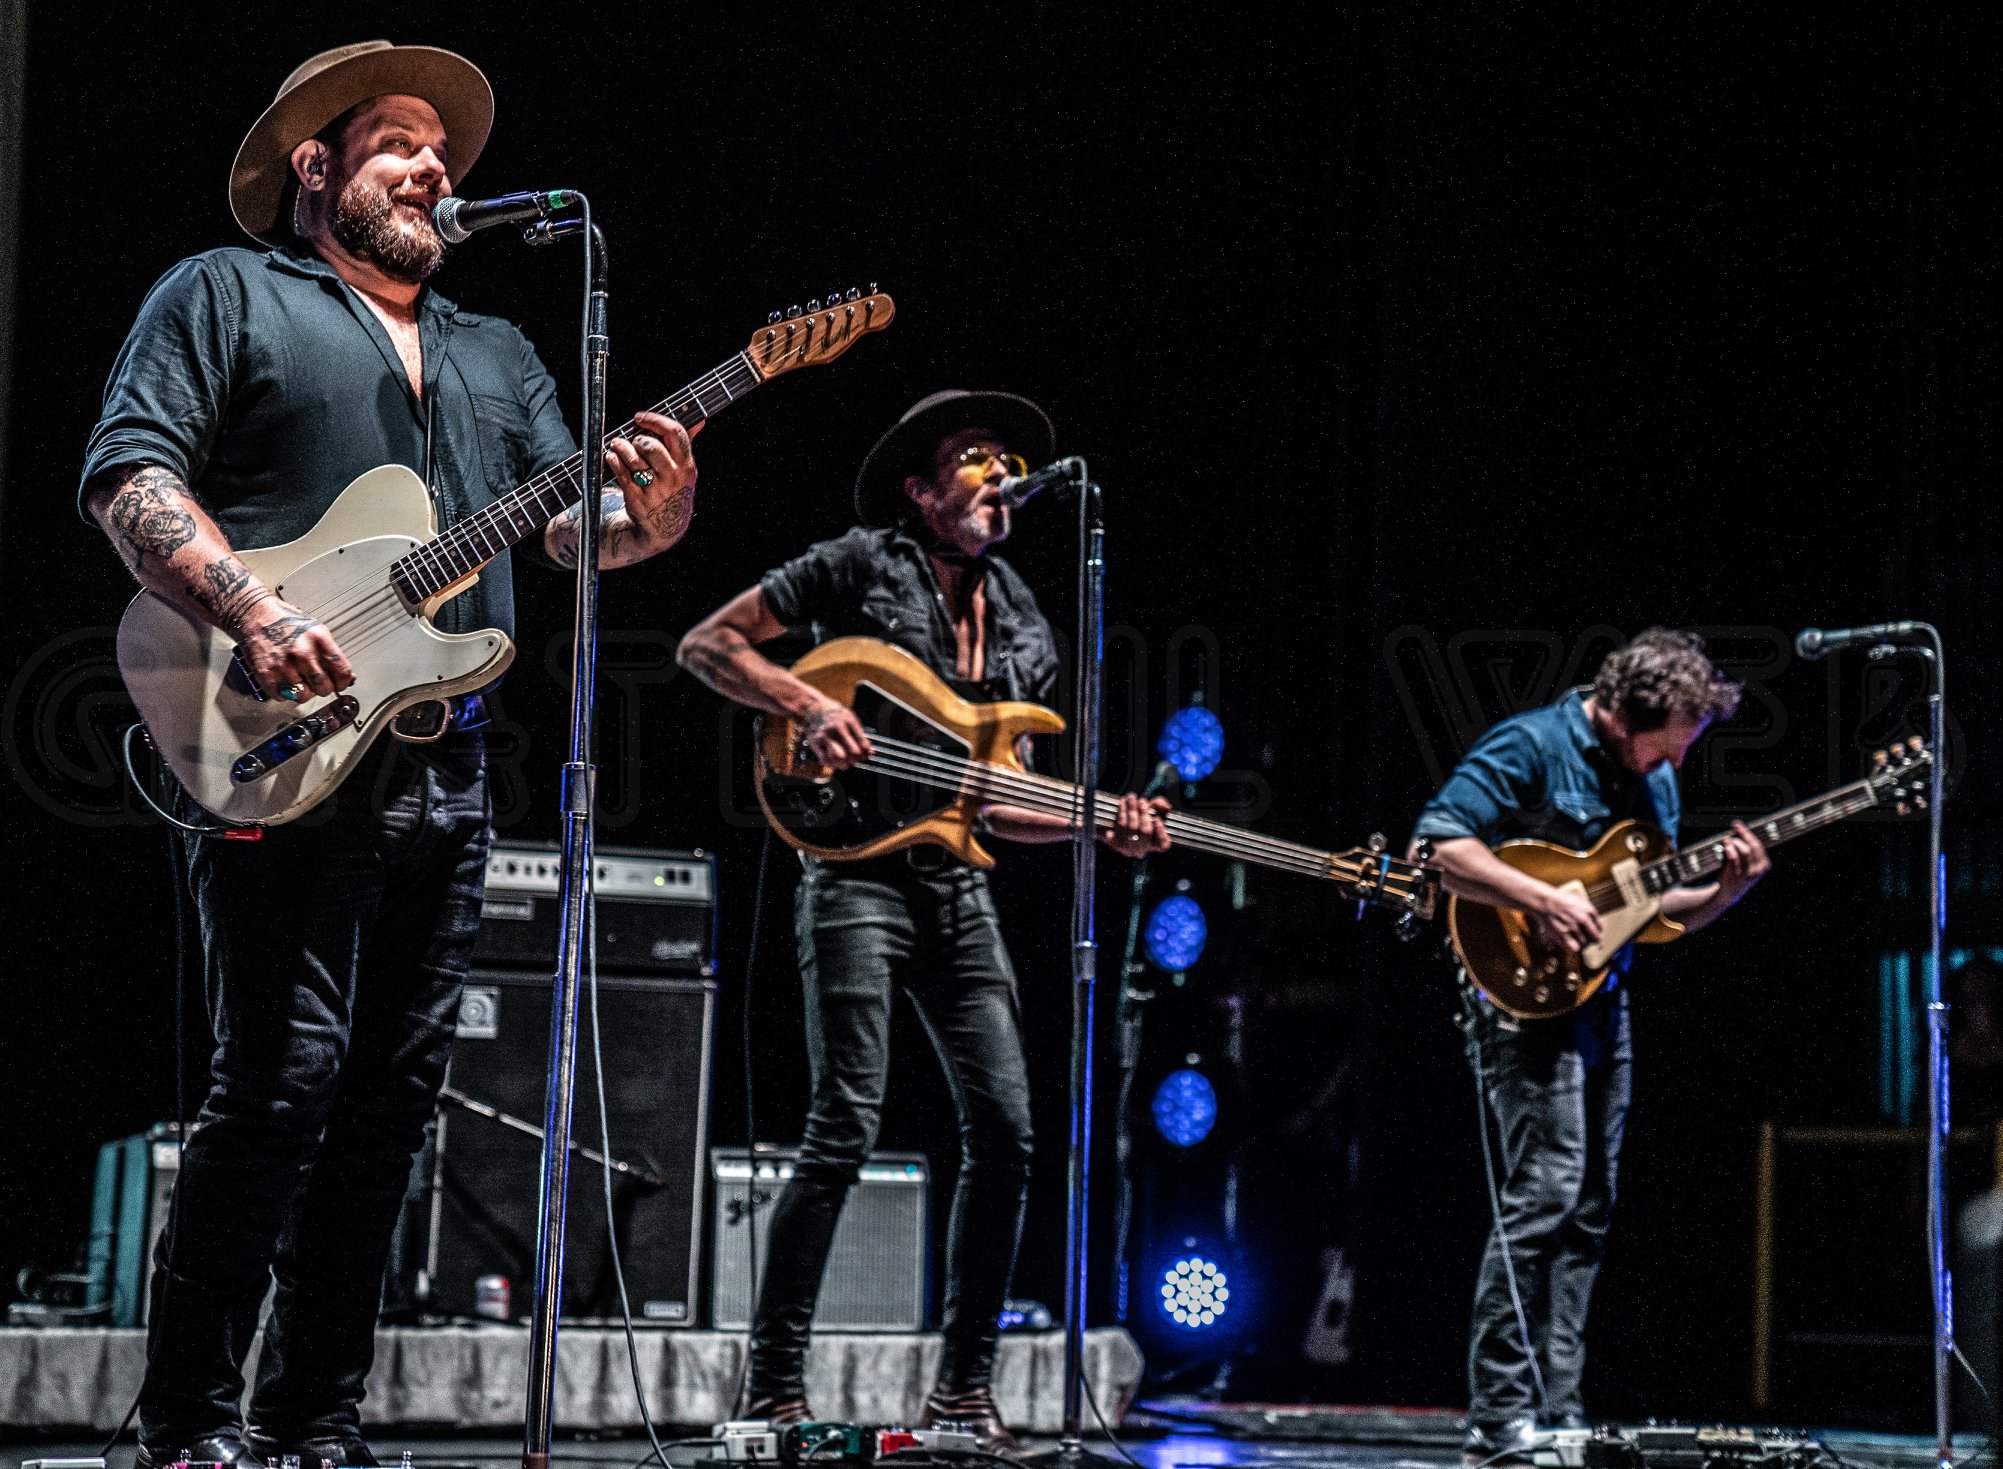 Nathaniel Rateliff & The Night Sweats confirm extensive run of 2022